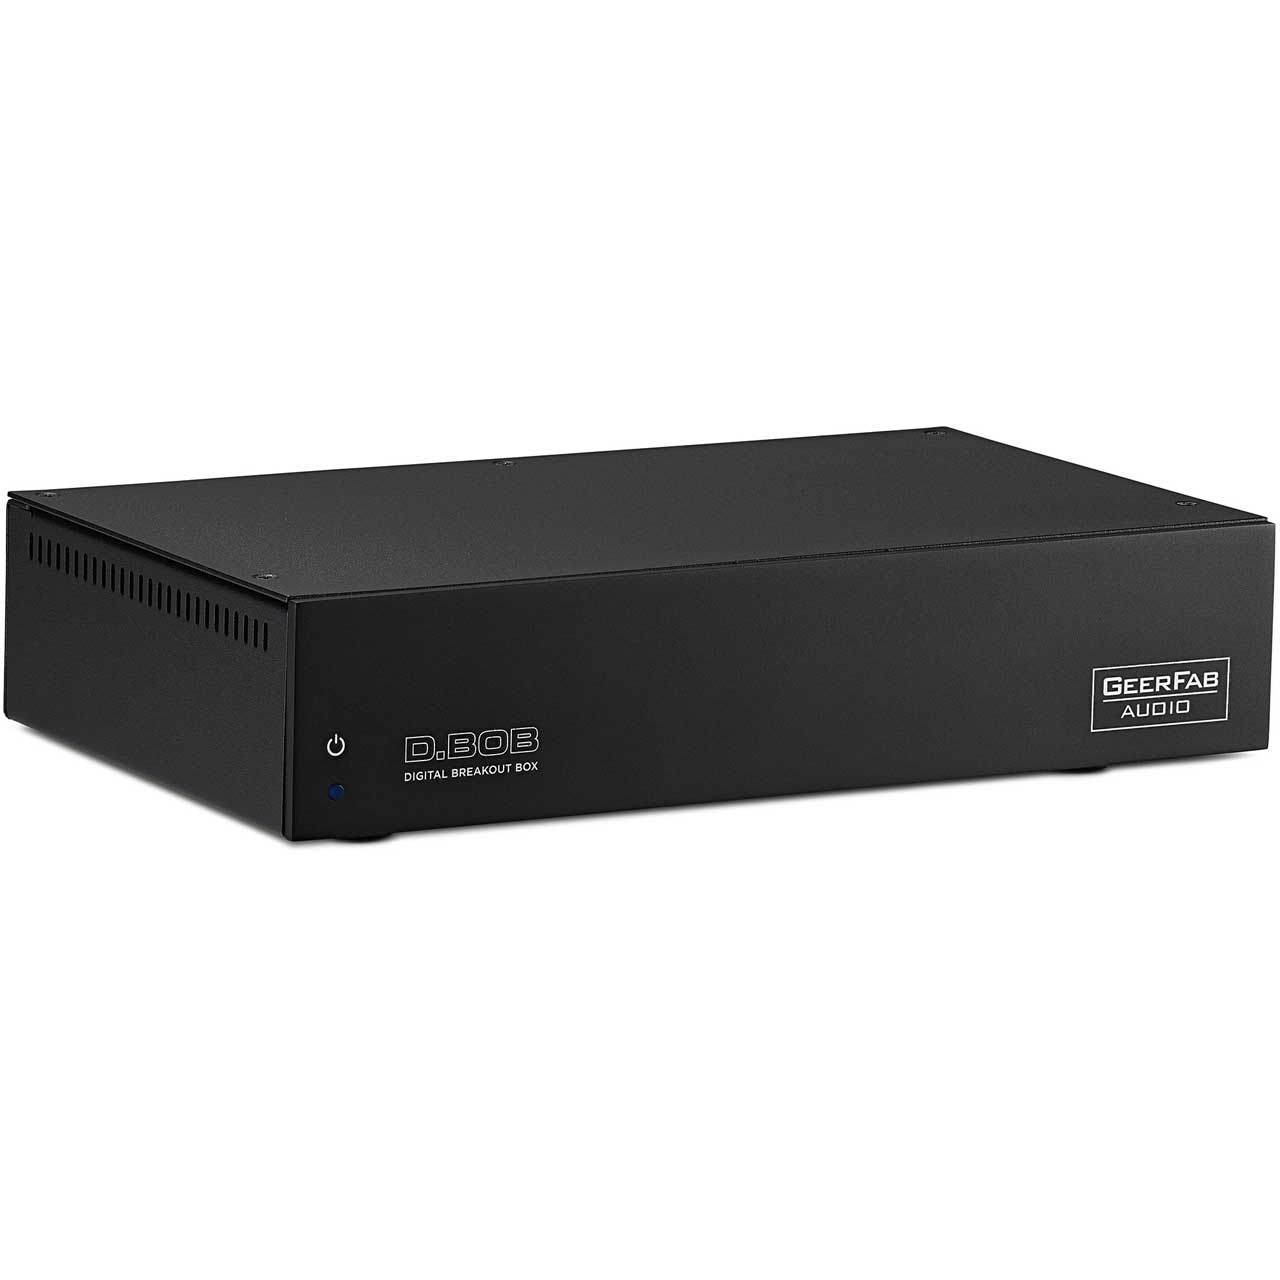 GeerFab Audio D.BOB HDMI Digital Breakout Box - Extracts DSD64 from SACDs and PCM up to 24-bit/192Hz from Blu-ray D.BOB